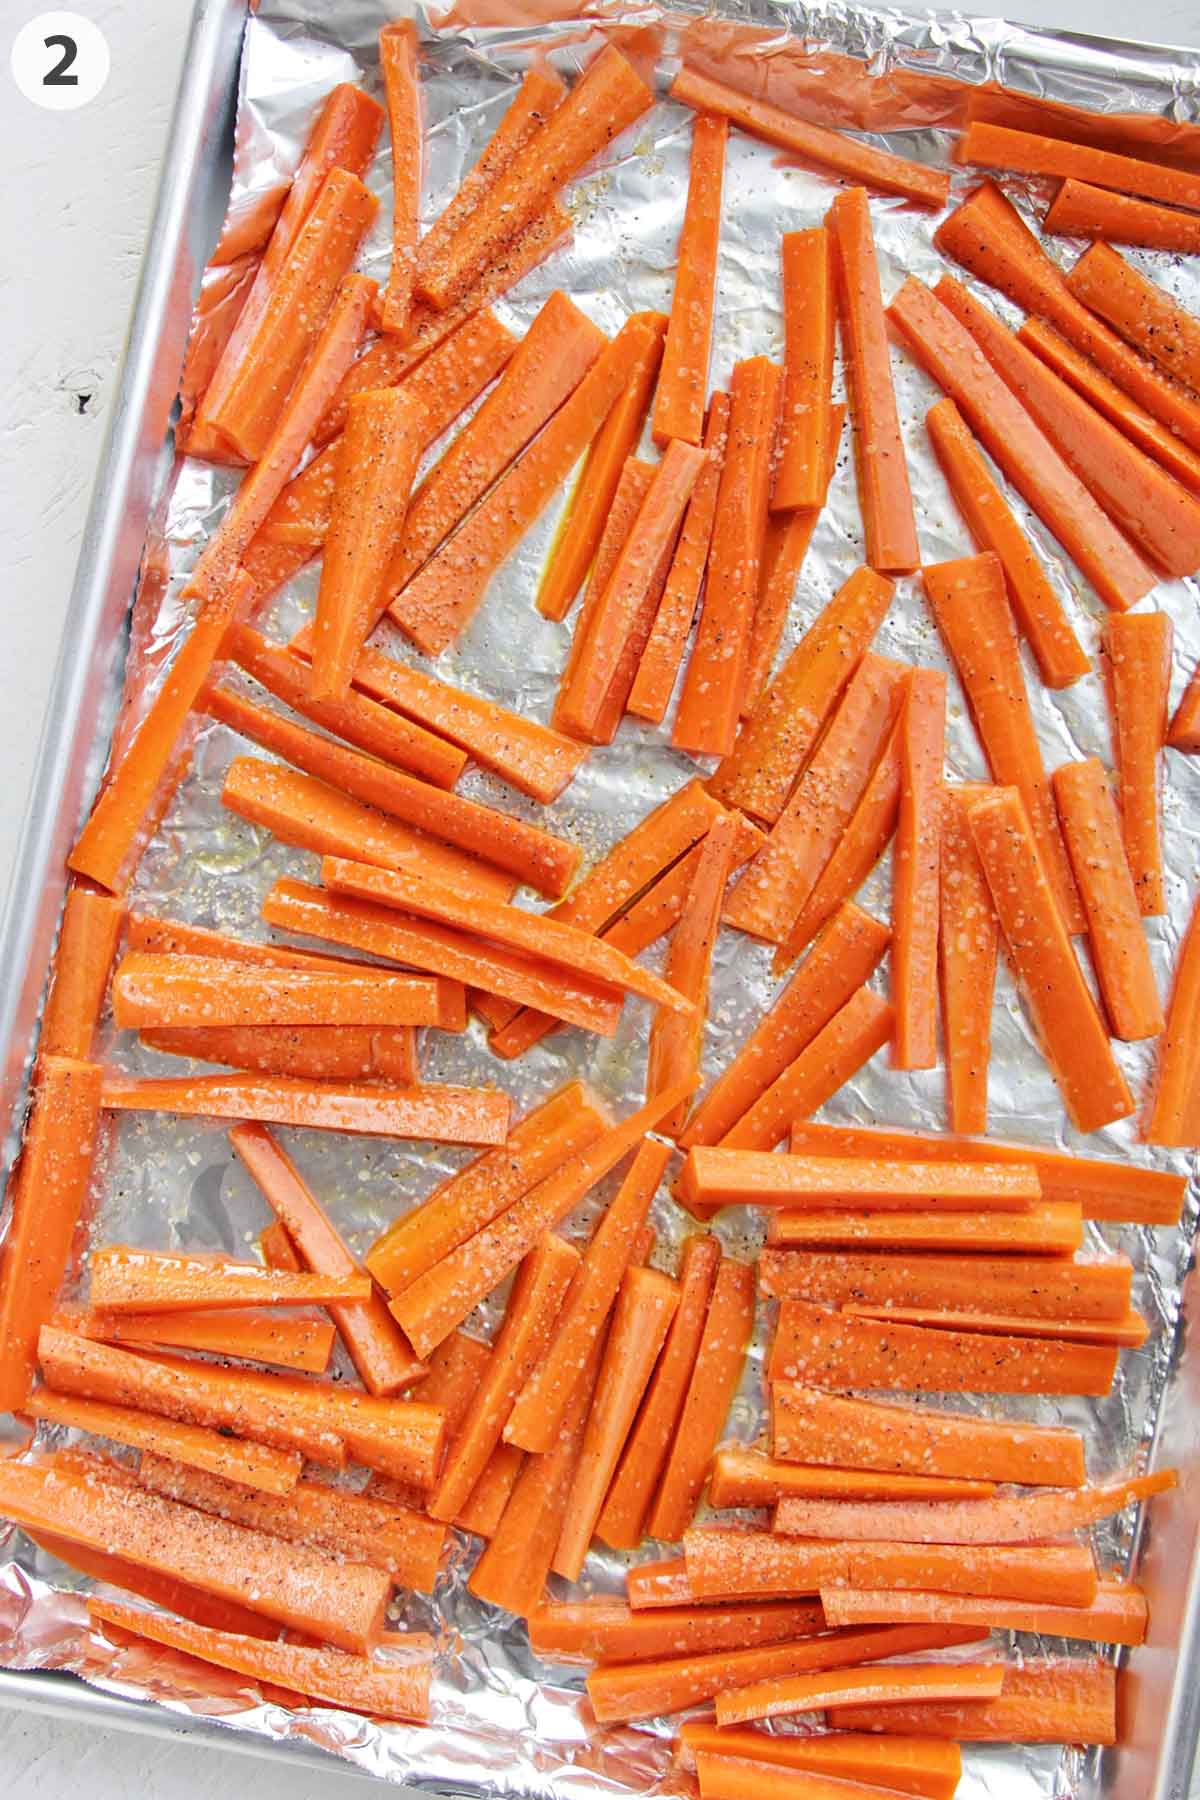 numbered photo showing oil glazed carrots on a sheet pan.